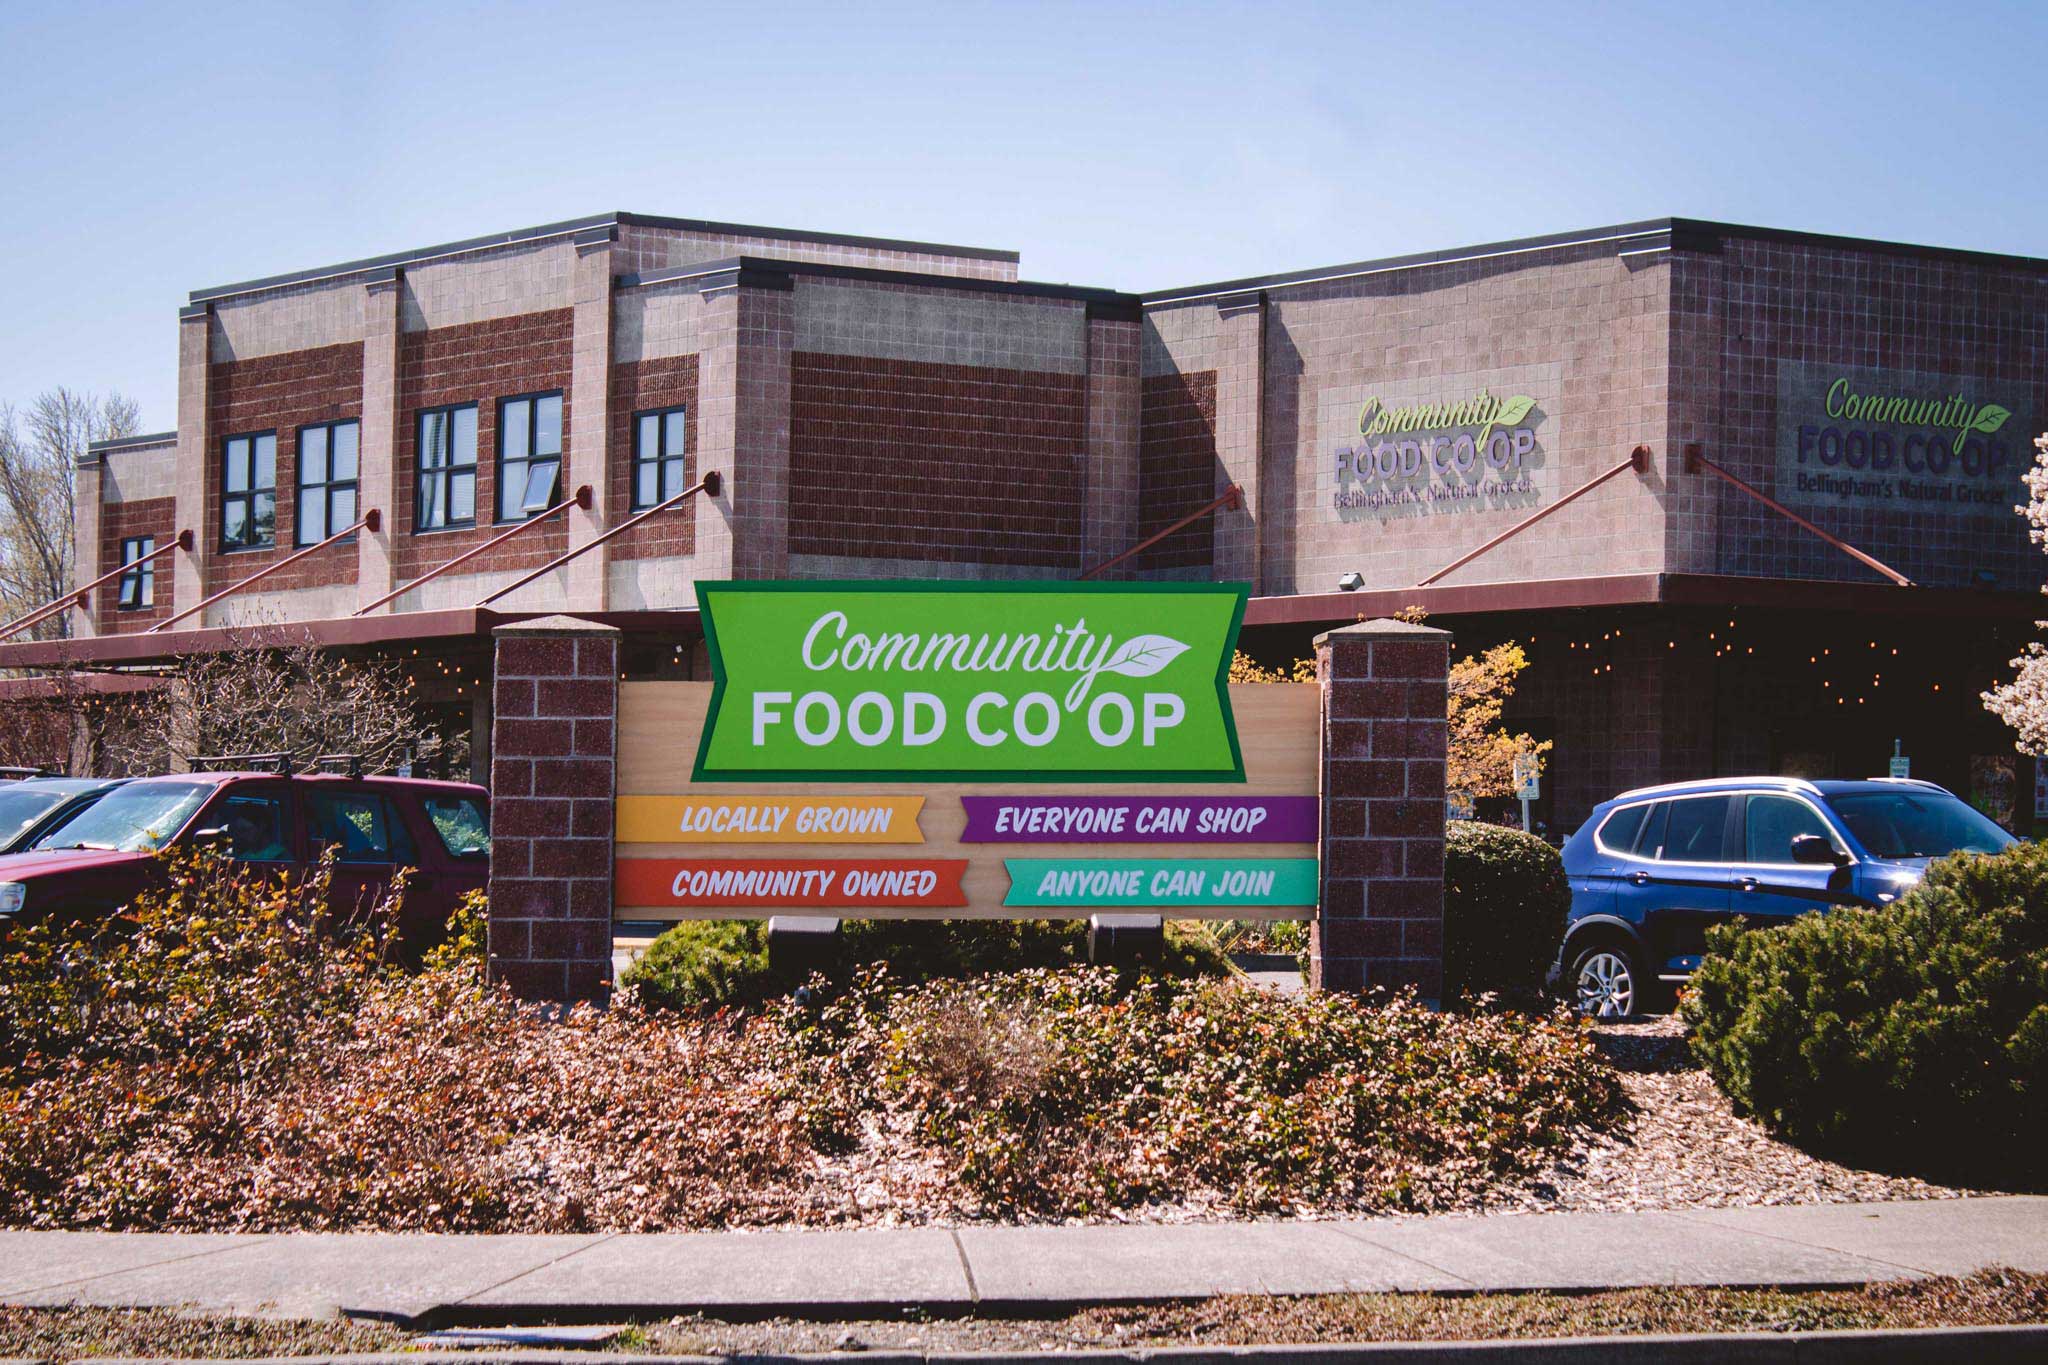 Community Food Co-op wayfinding monument sign